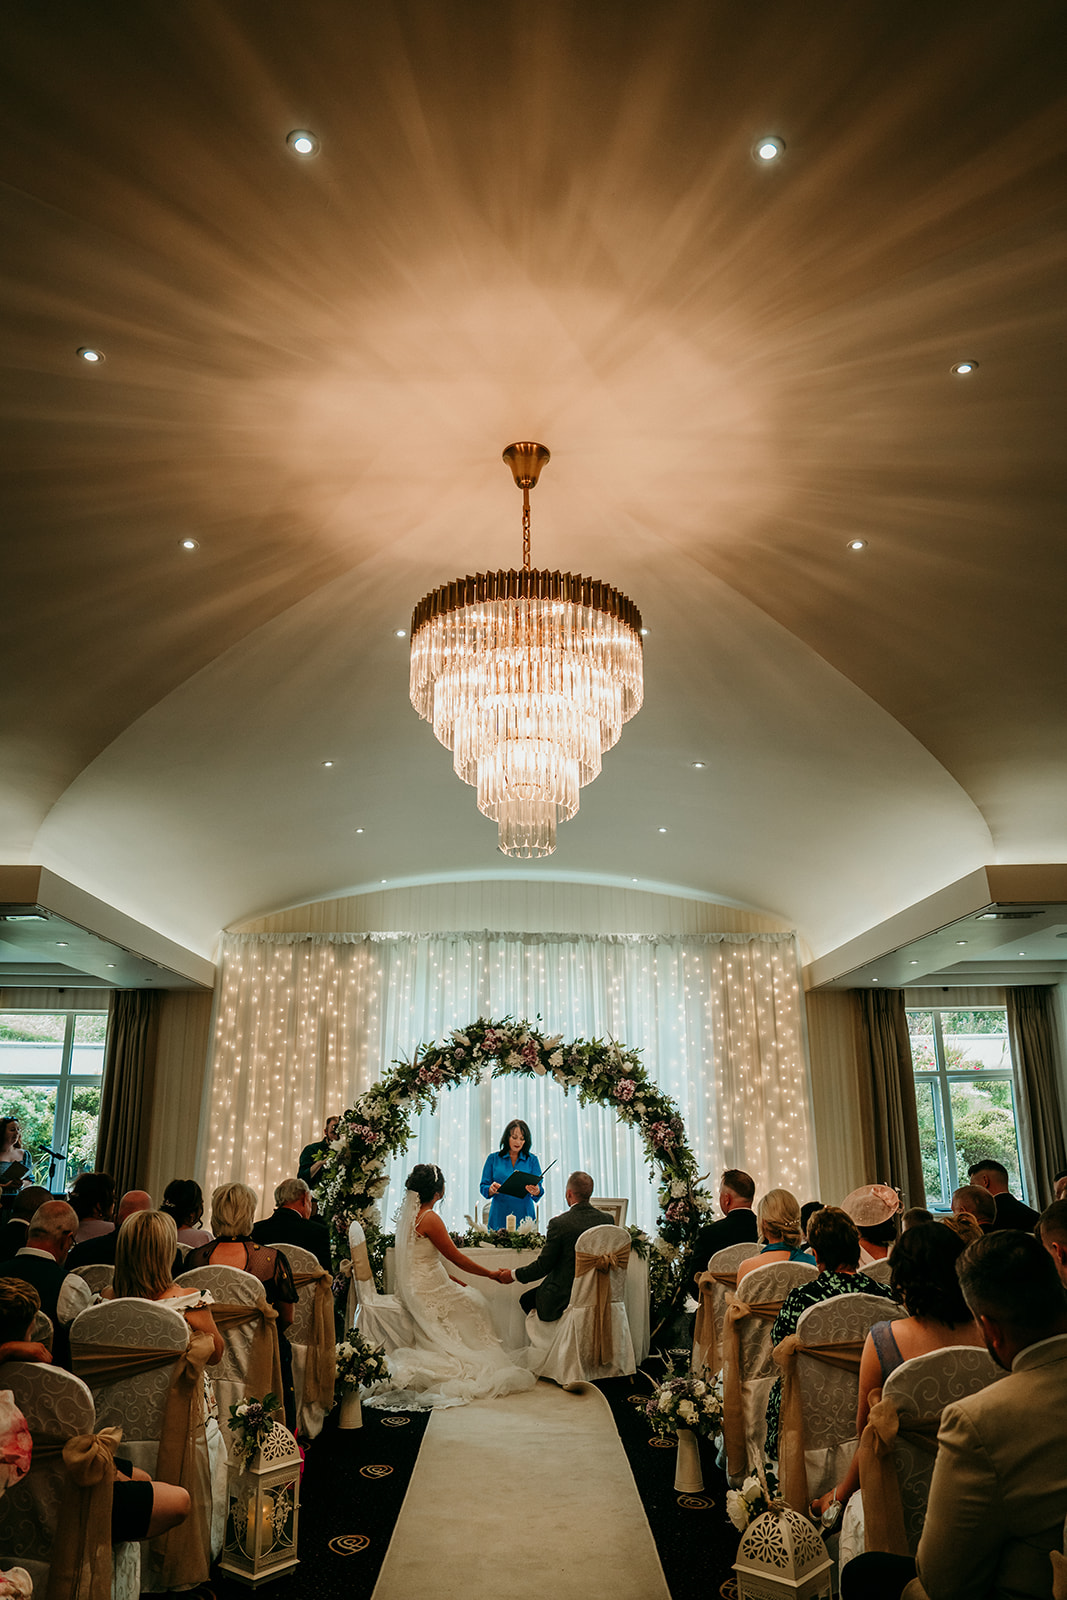 Shandon hotel weddings in donegal image by James Aiken photography